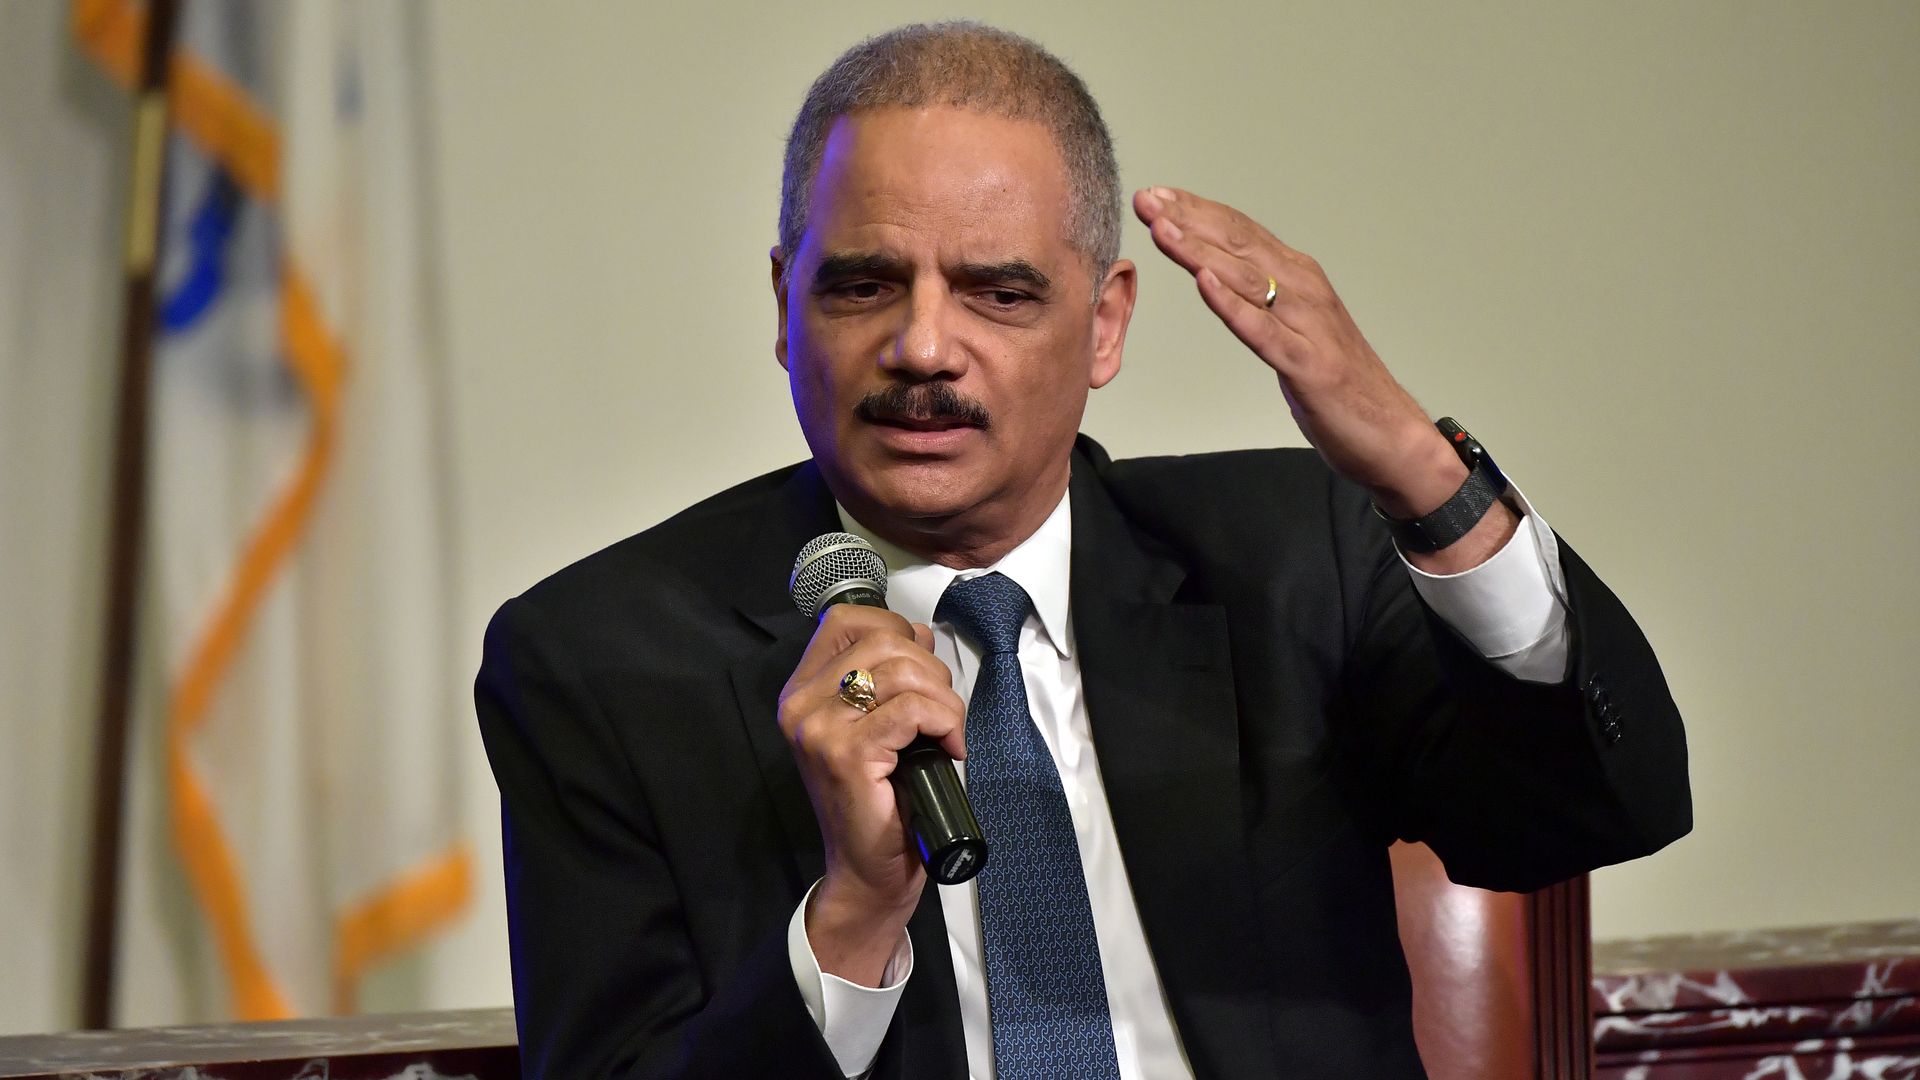 Eric Holder gestures with one arm.